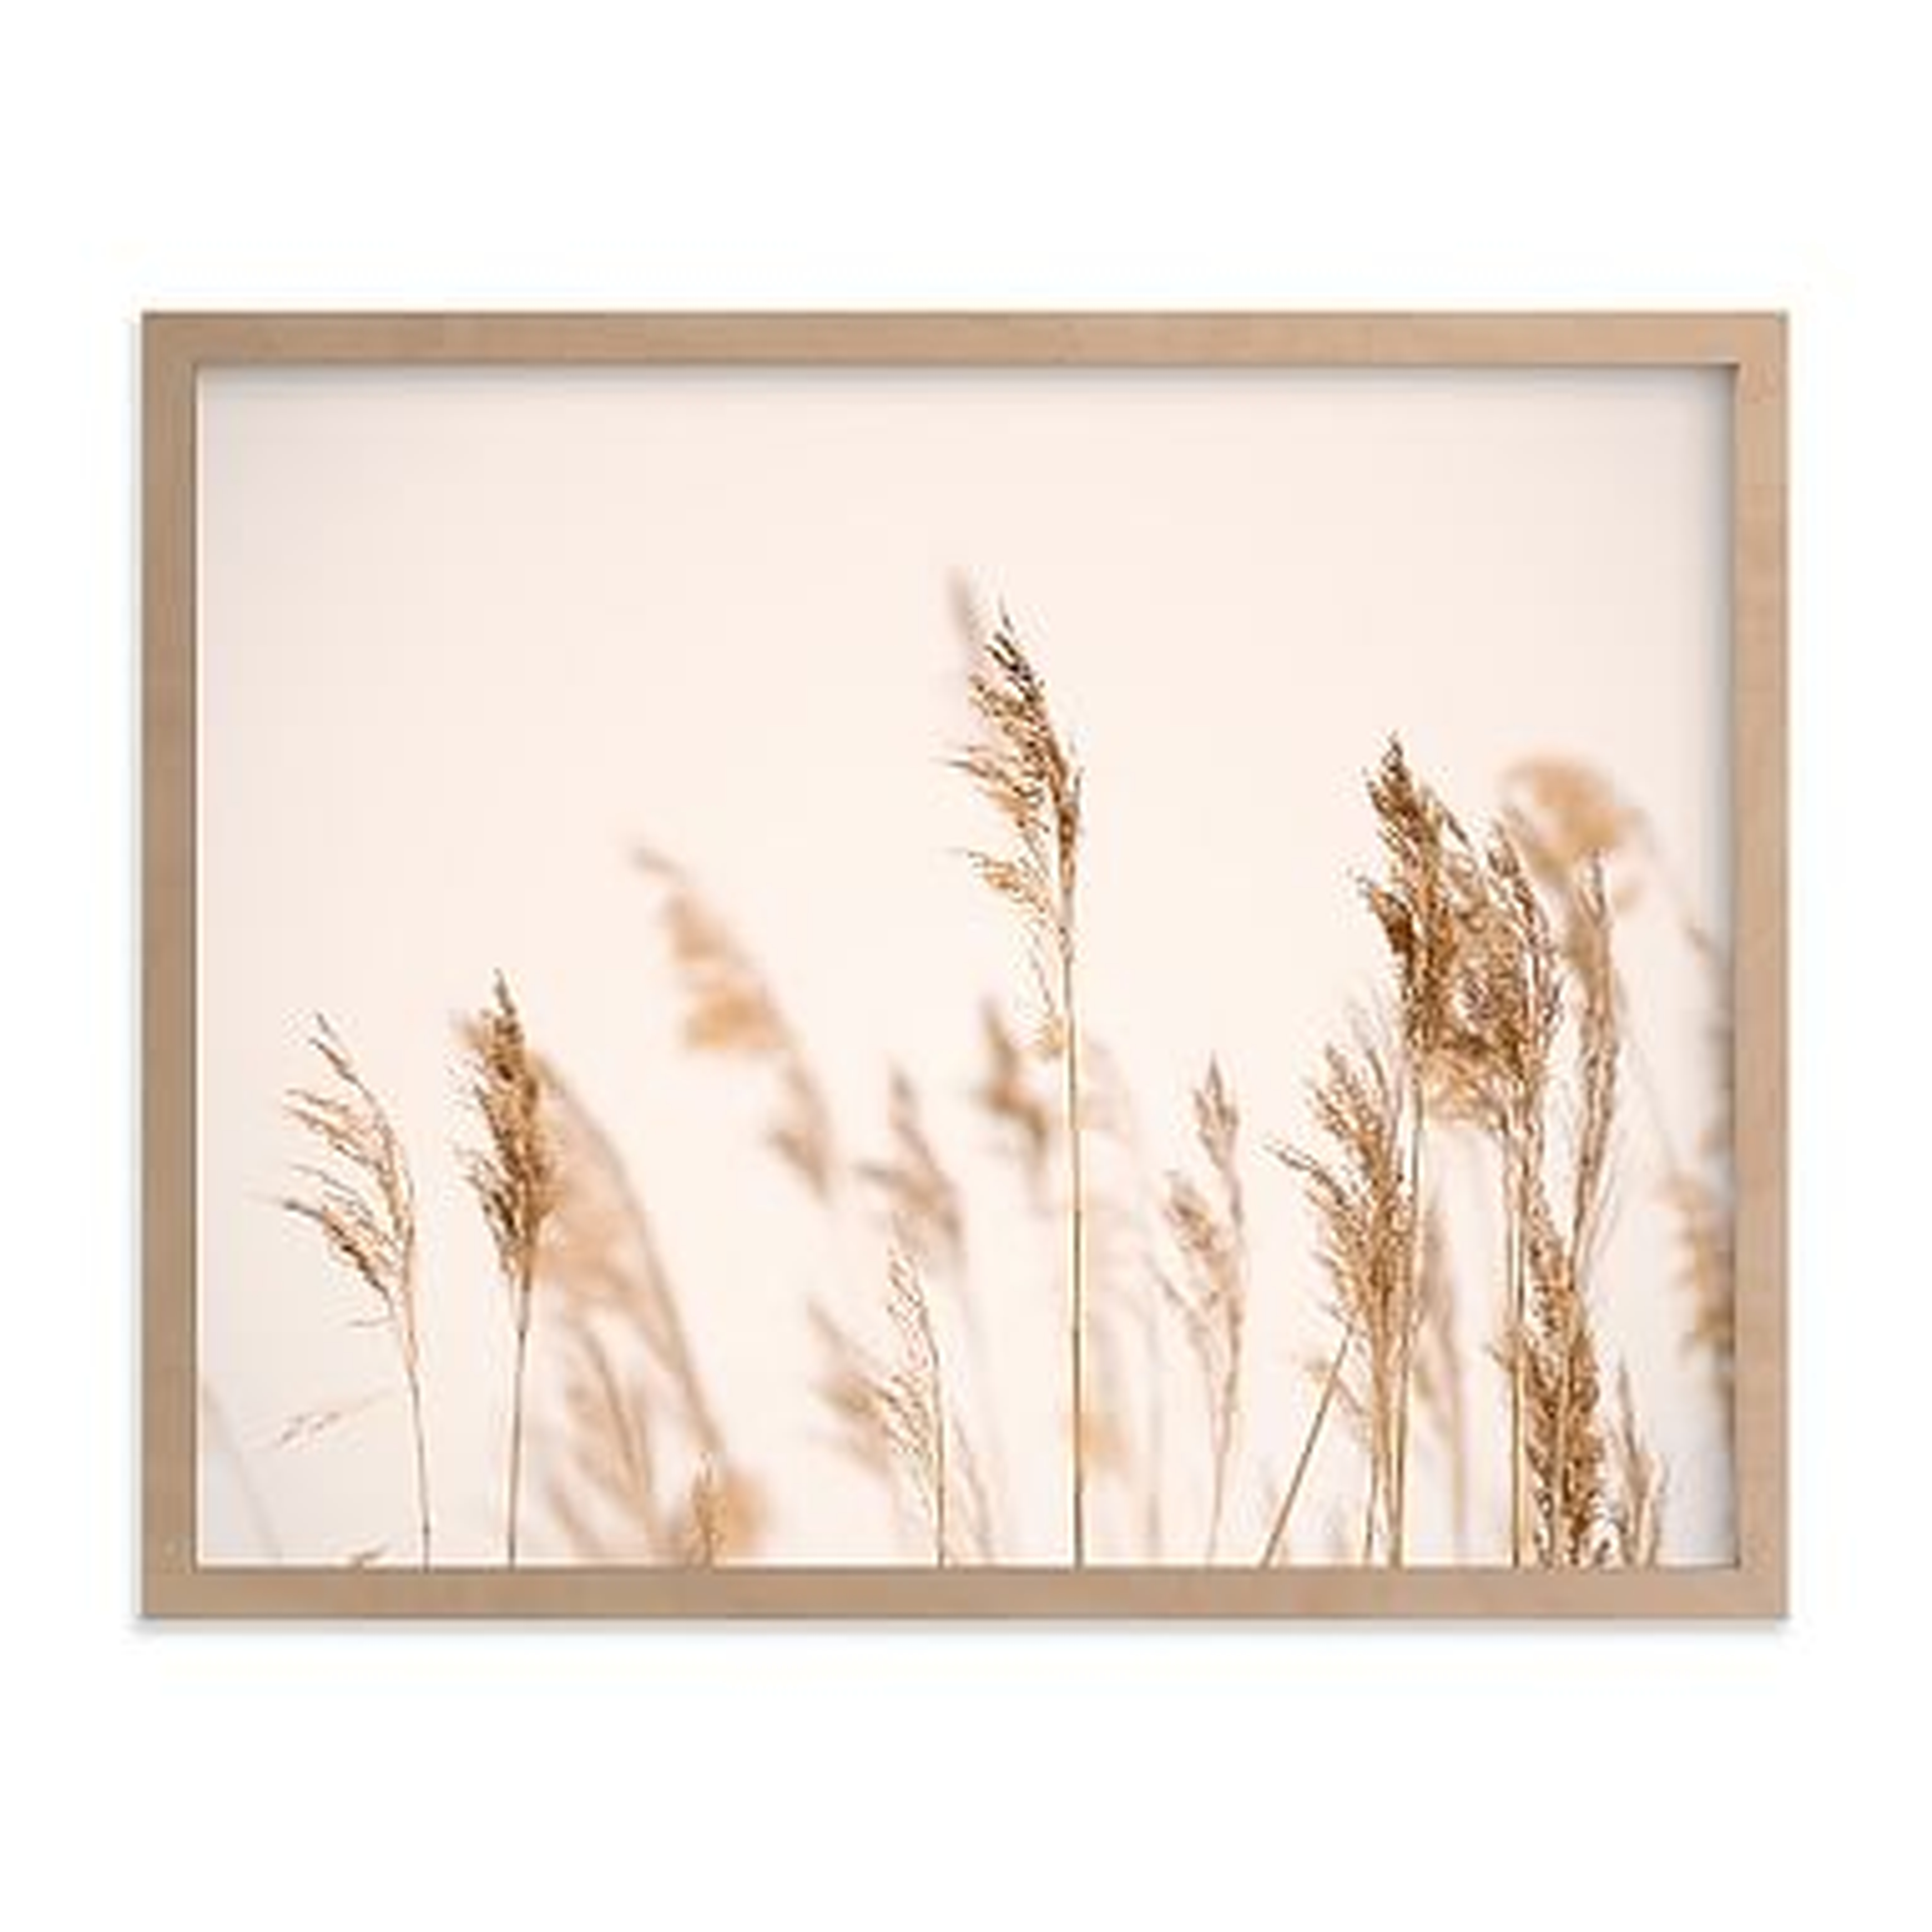 Summer Weeds Framed Art by Minted(R), Natural, 11x14 - Pottery Barn Teen